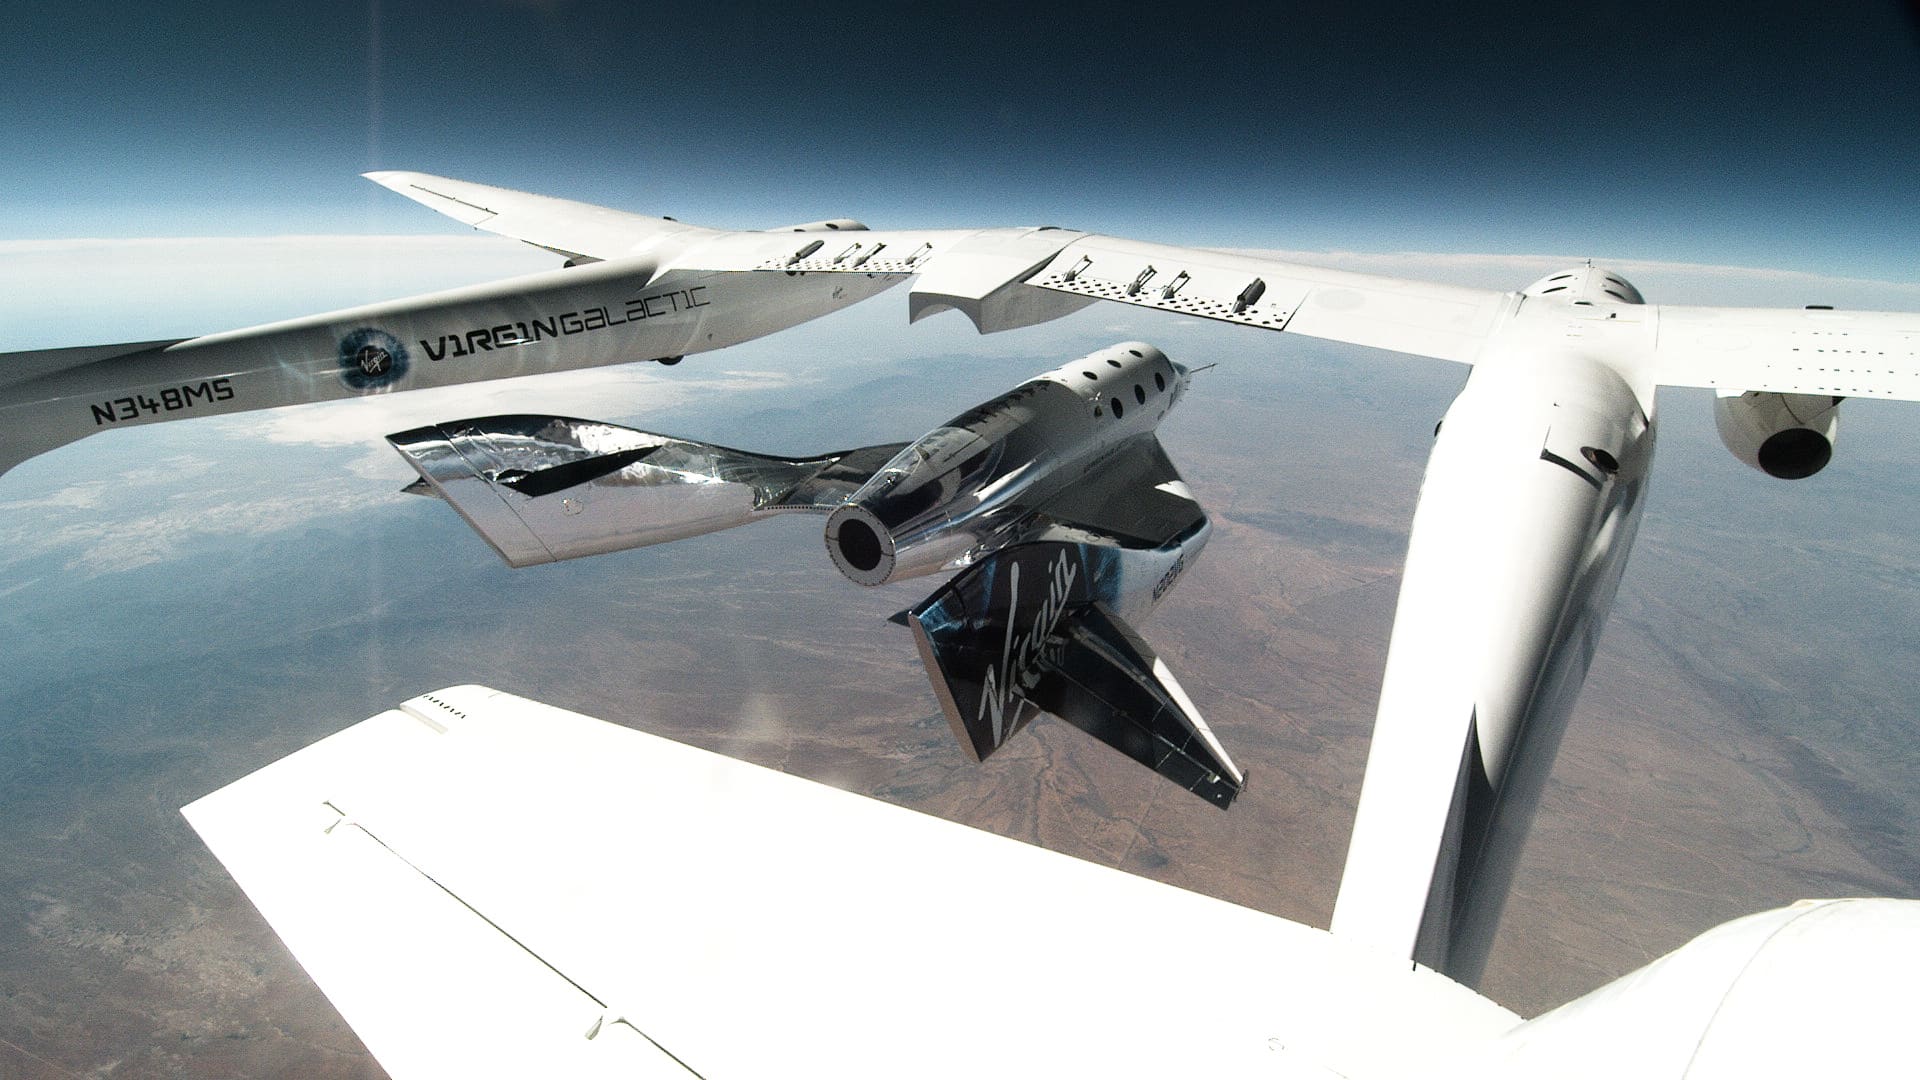 Virgin Galactic's carrier aircraft releases its spacecraft Unity during a glide flight test.